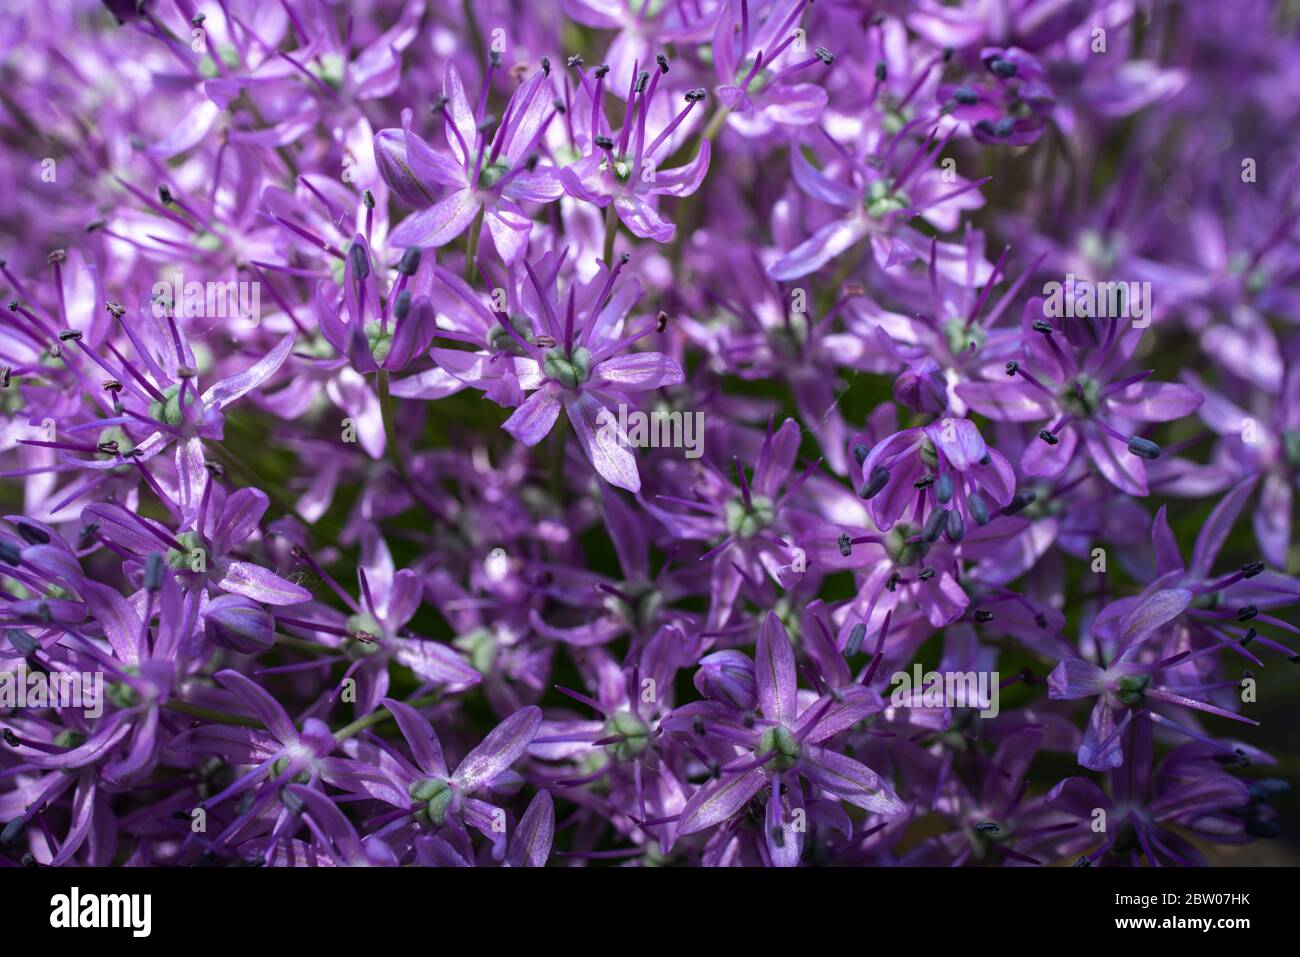 Close shot into a flower umbel of a ornamental onion in bloom against the green background. Stock Photo